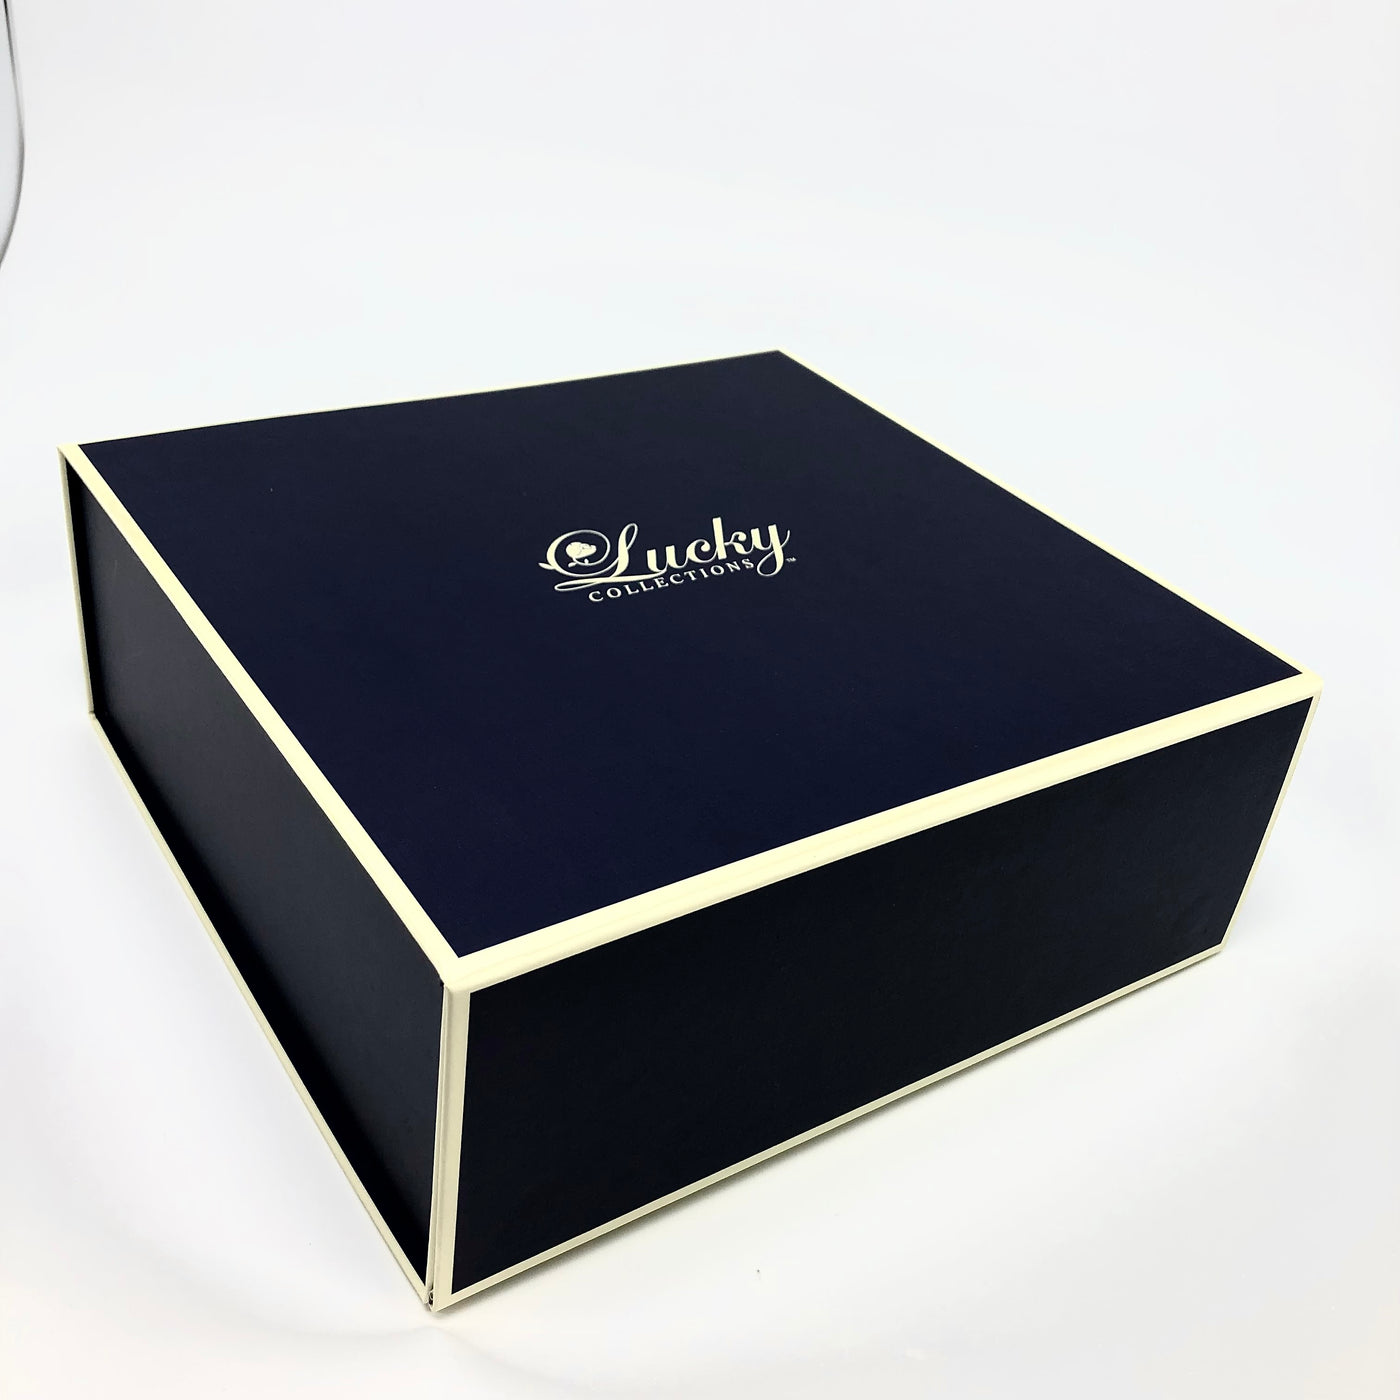 Tiara comes  in Custom Box for convenient presentation & keepsake Lucky Collections ™